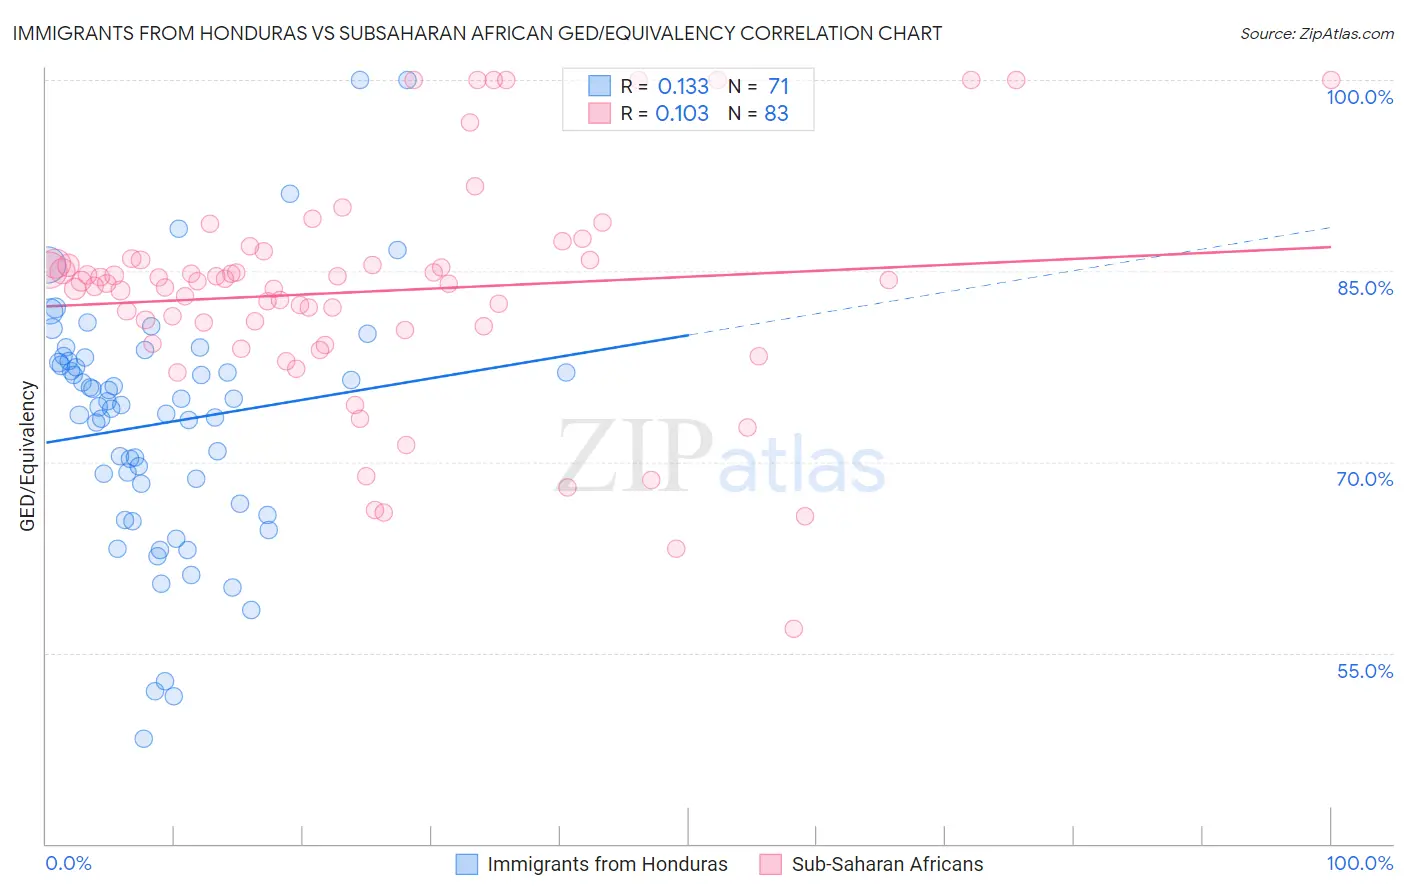 Immigrants from Honduras vs Subsaharan African GED/Equivalency